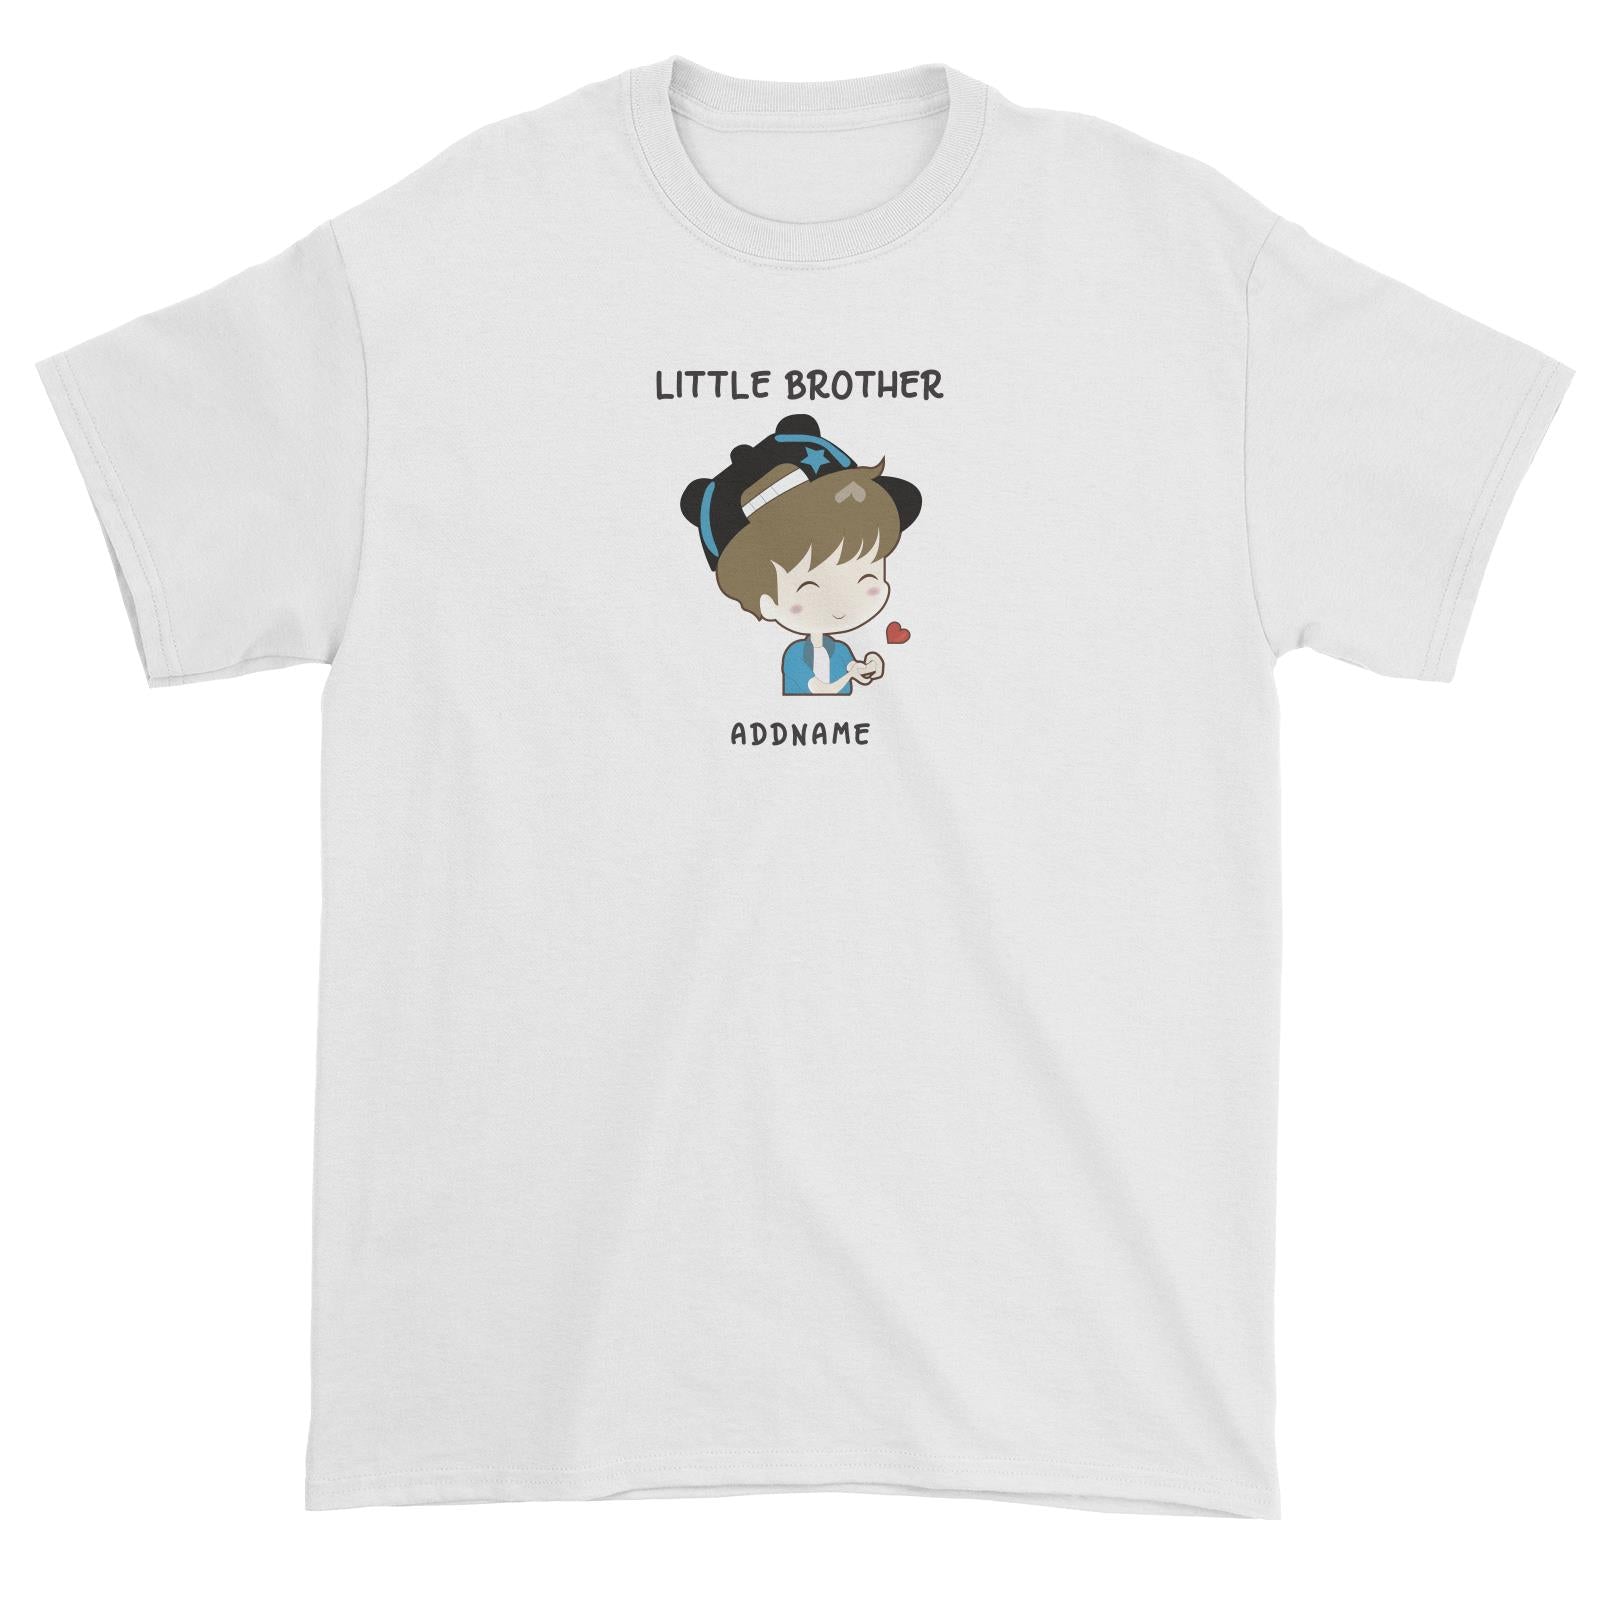 My Lovely Family Series Little Brother Addname Unisex T-Shirt (FLASH DEAL)